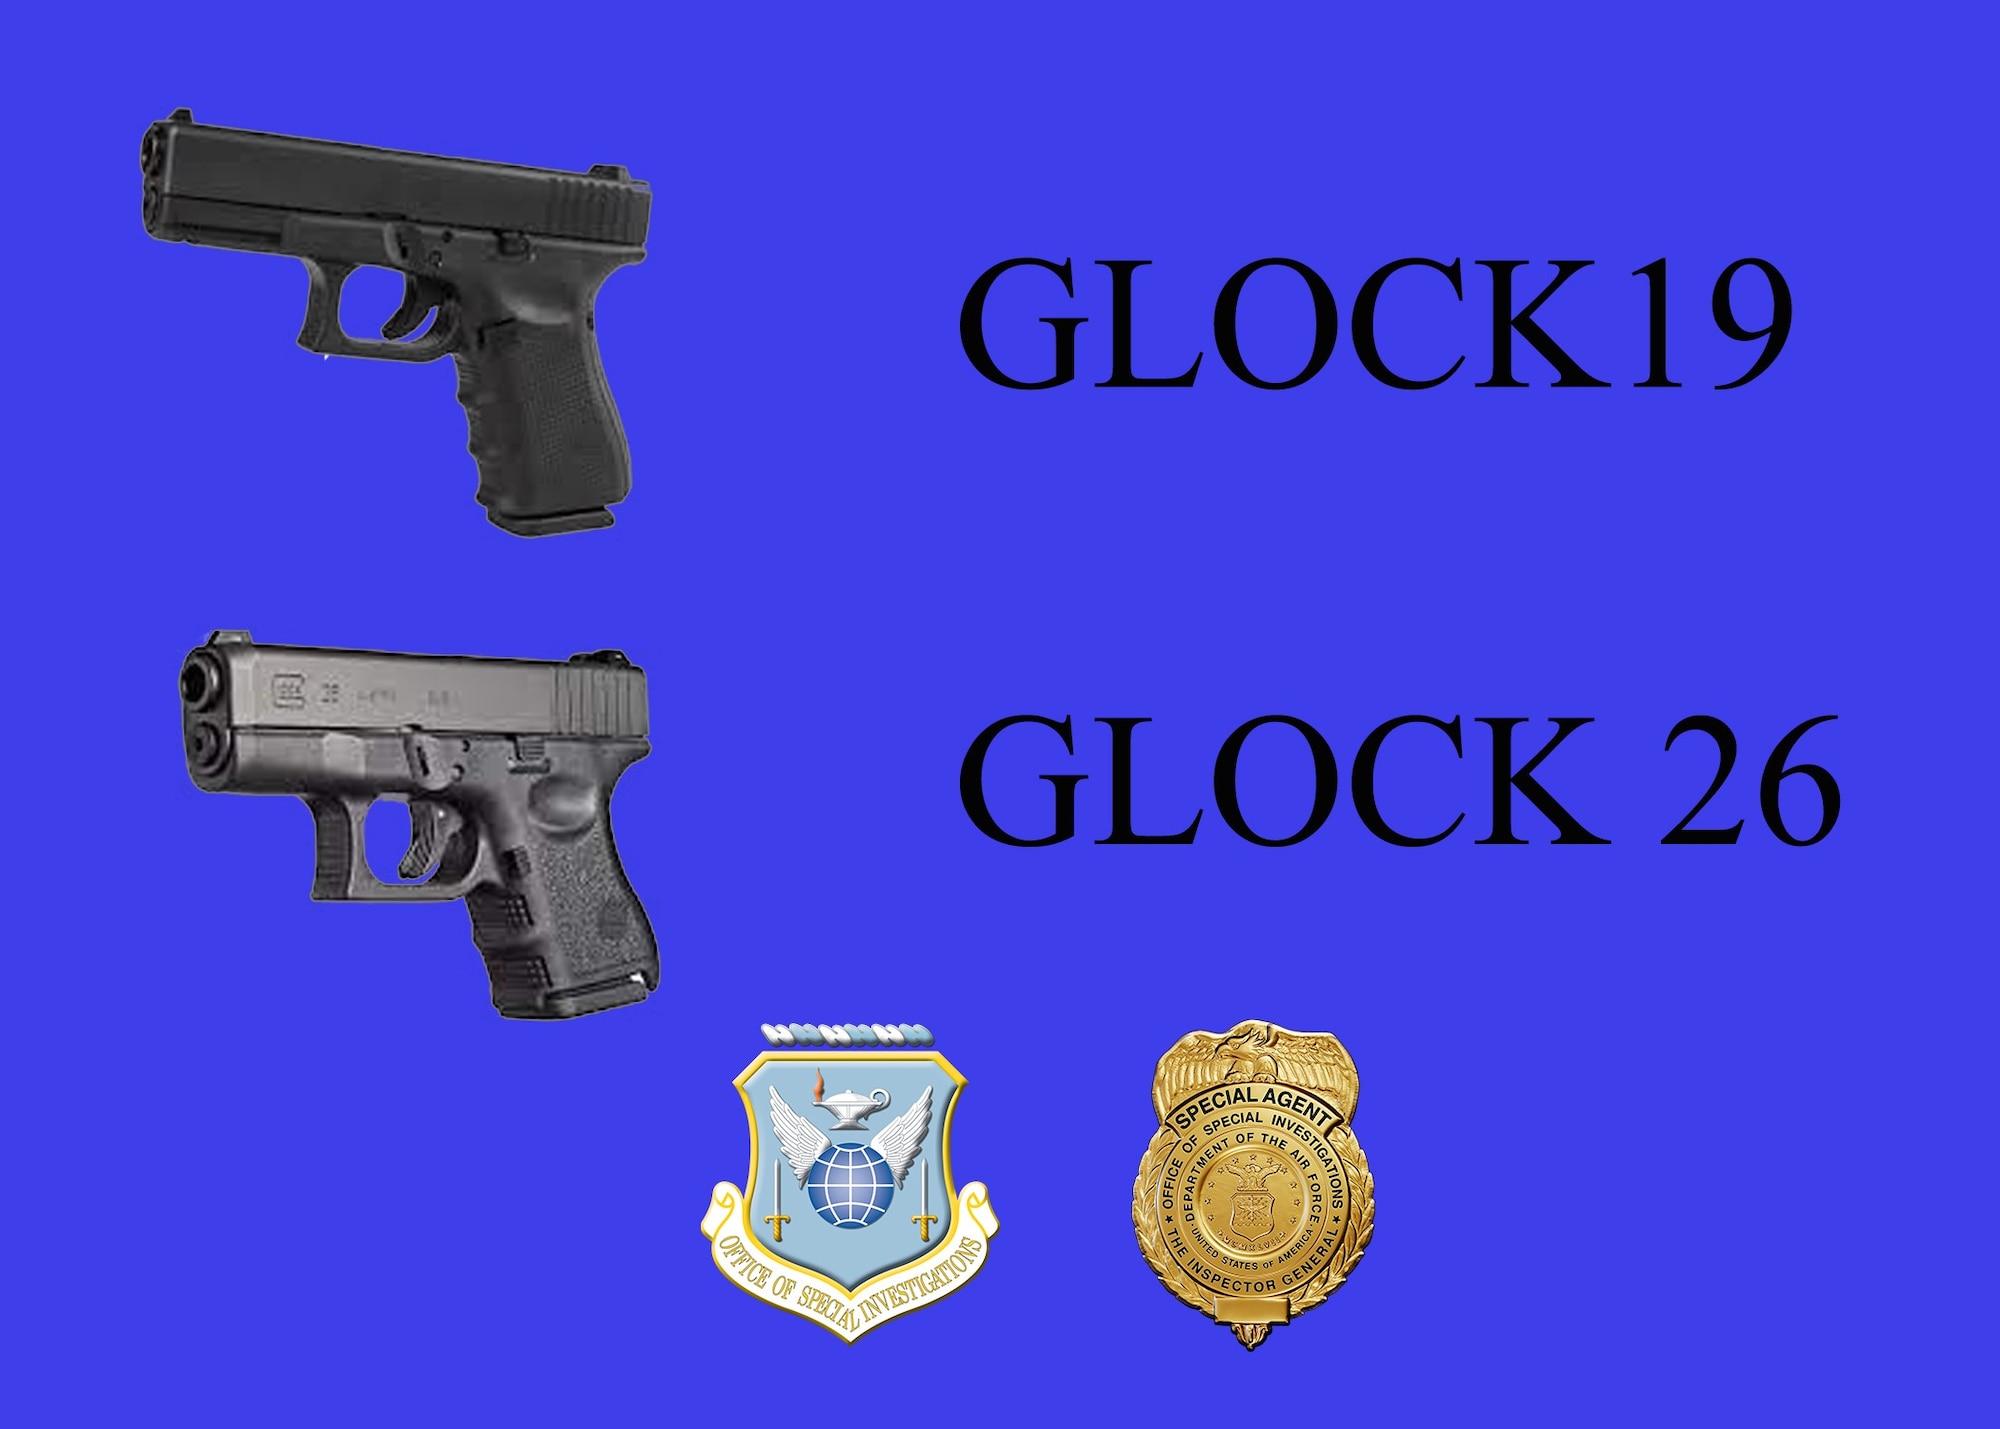 Special Agents will soon have the option of carrying the Glock 19 or 26 sidearms, with the first batch set to roll out later this year, as announced recently by the Office of Special Investigation’s commander. The new weapons will replace OSI’s aging Sig Saur M11/P228 systems. (Graphic by Staff Sgt. Joshua King, OSI/PA)